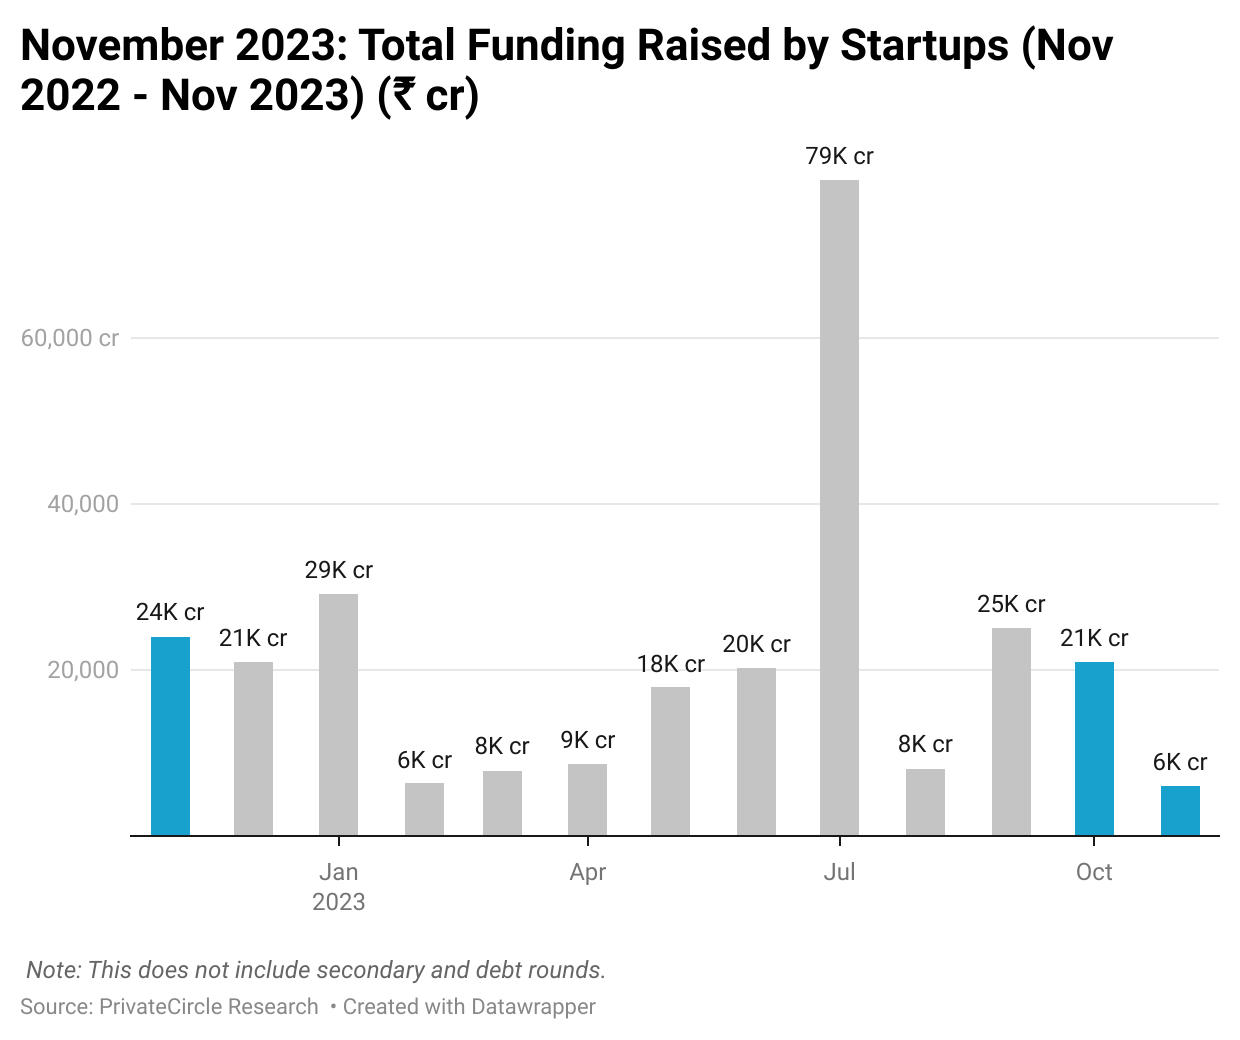 November 2023: Total Funding Raised by Startups (Nov 2022 - Nov 2023) (₹ cr).

Total funding raised in Nov 2023 was 71% lower than Oct 2023. In year-on-year comparison, the Nov 2023 funding value was 74% lower than Nov 2022.
